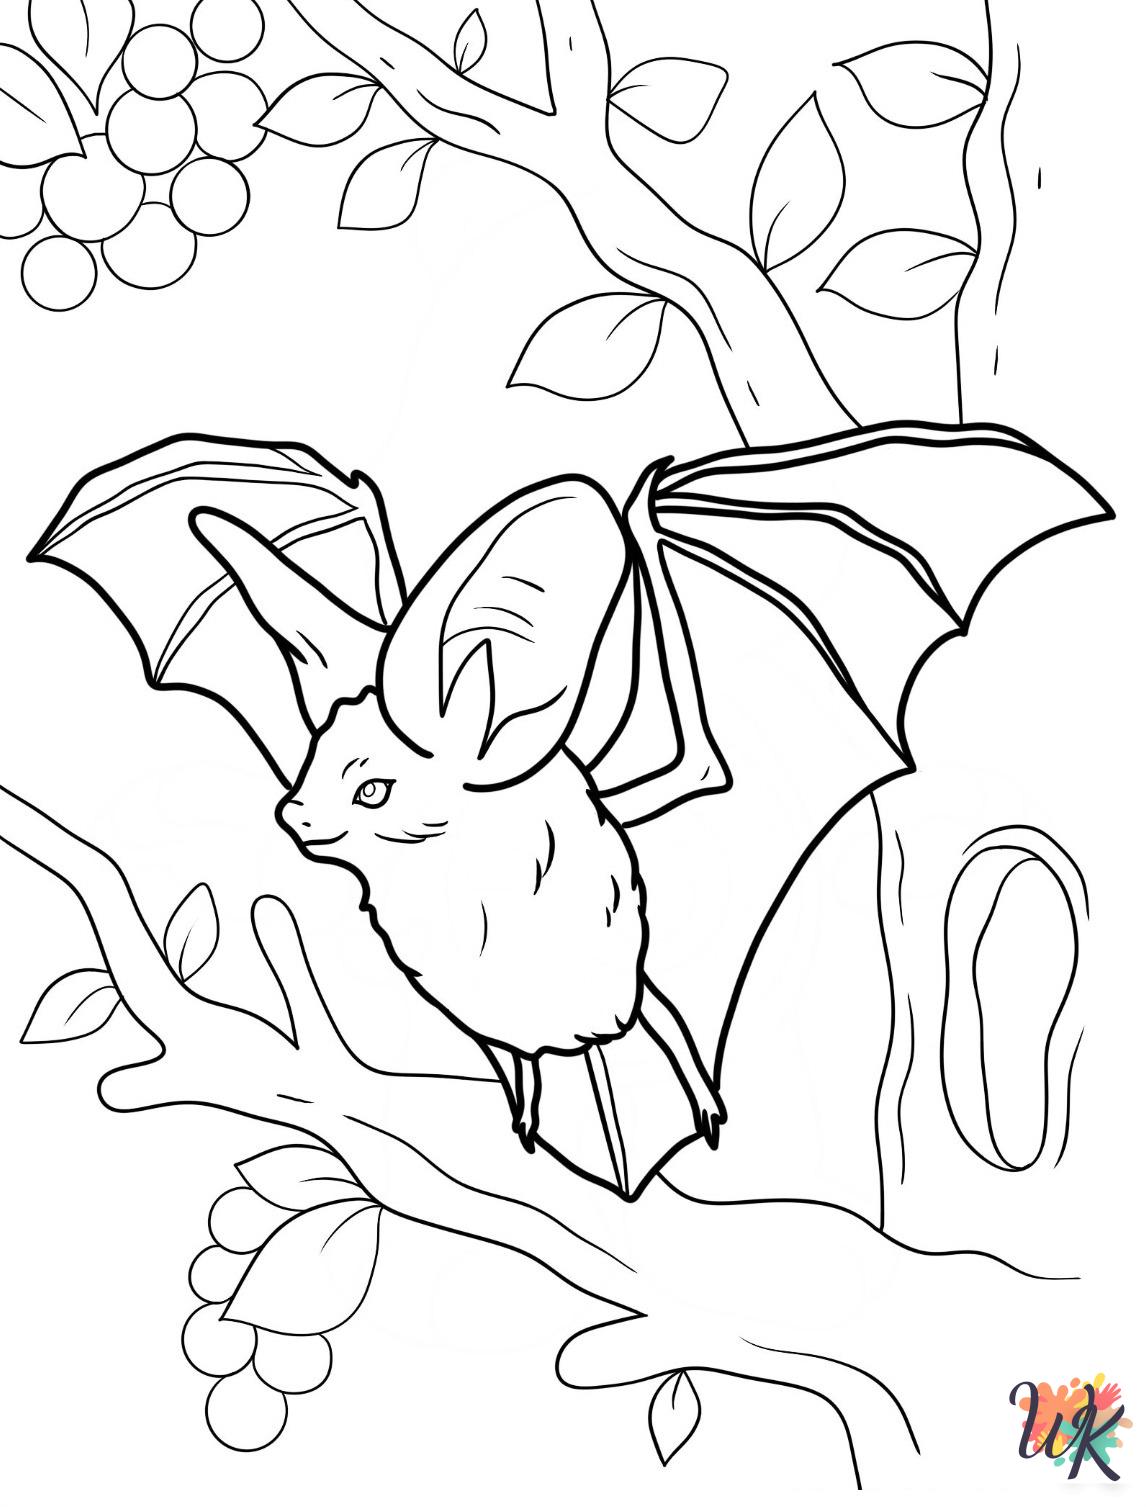 free full size printable Bat coloring pages for adults pdf